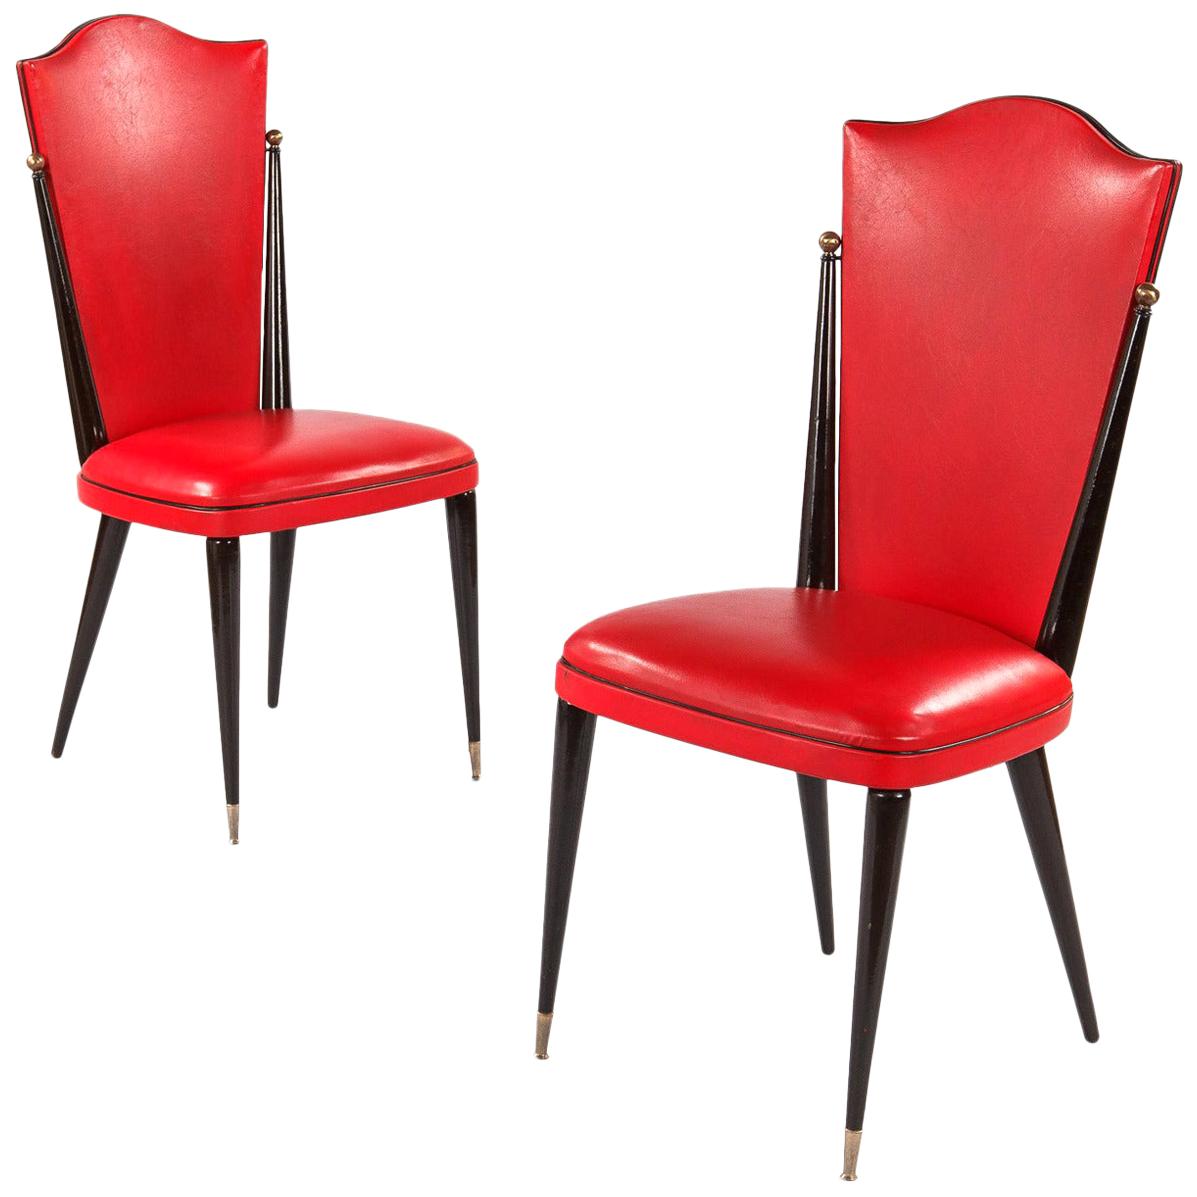 Pair of Midcentury French Red Vinyl and Black Lacquered Wood Side Chairs, 1960s